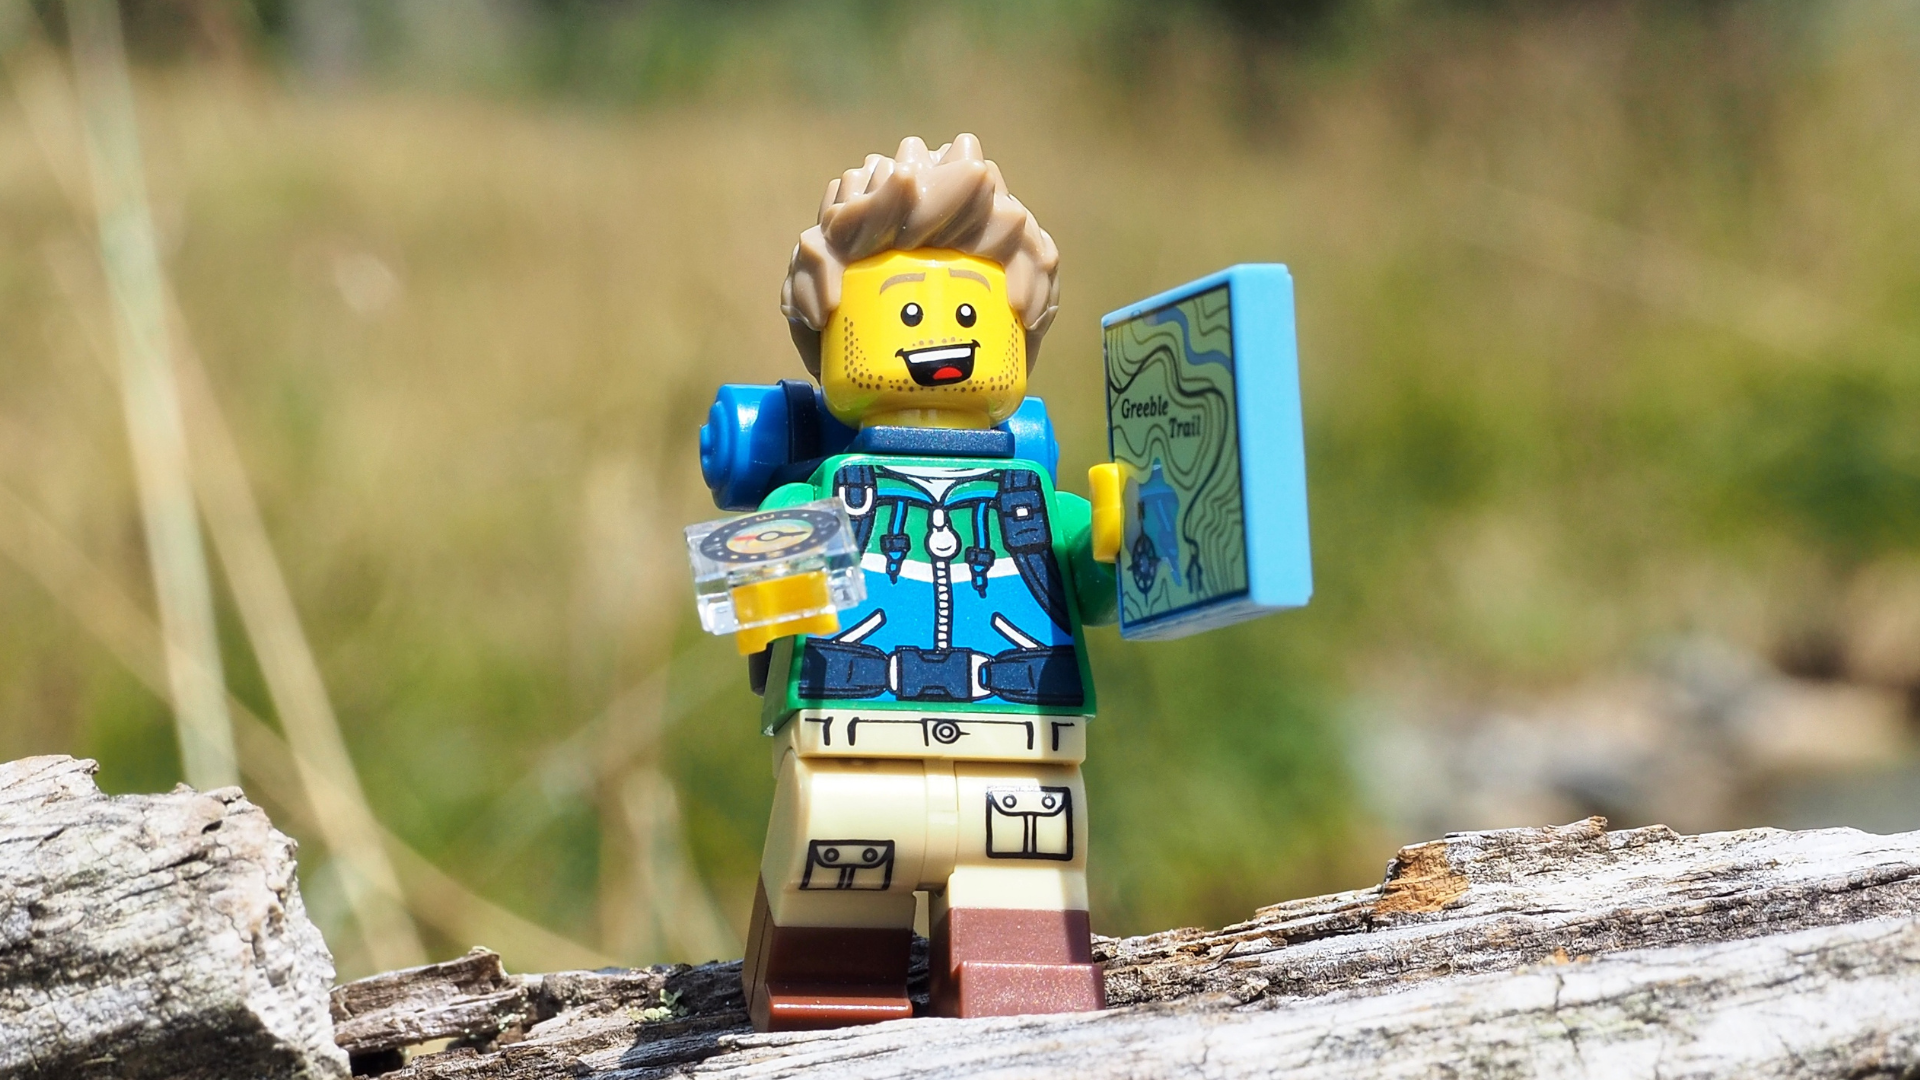 Lego Minifigure with a map and compass standing on a log with grassland in the background